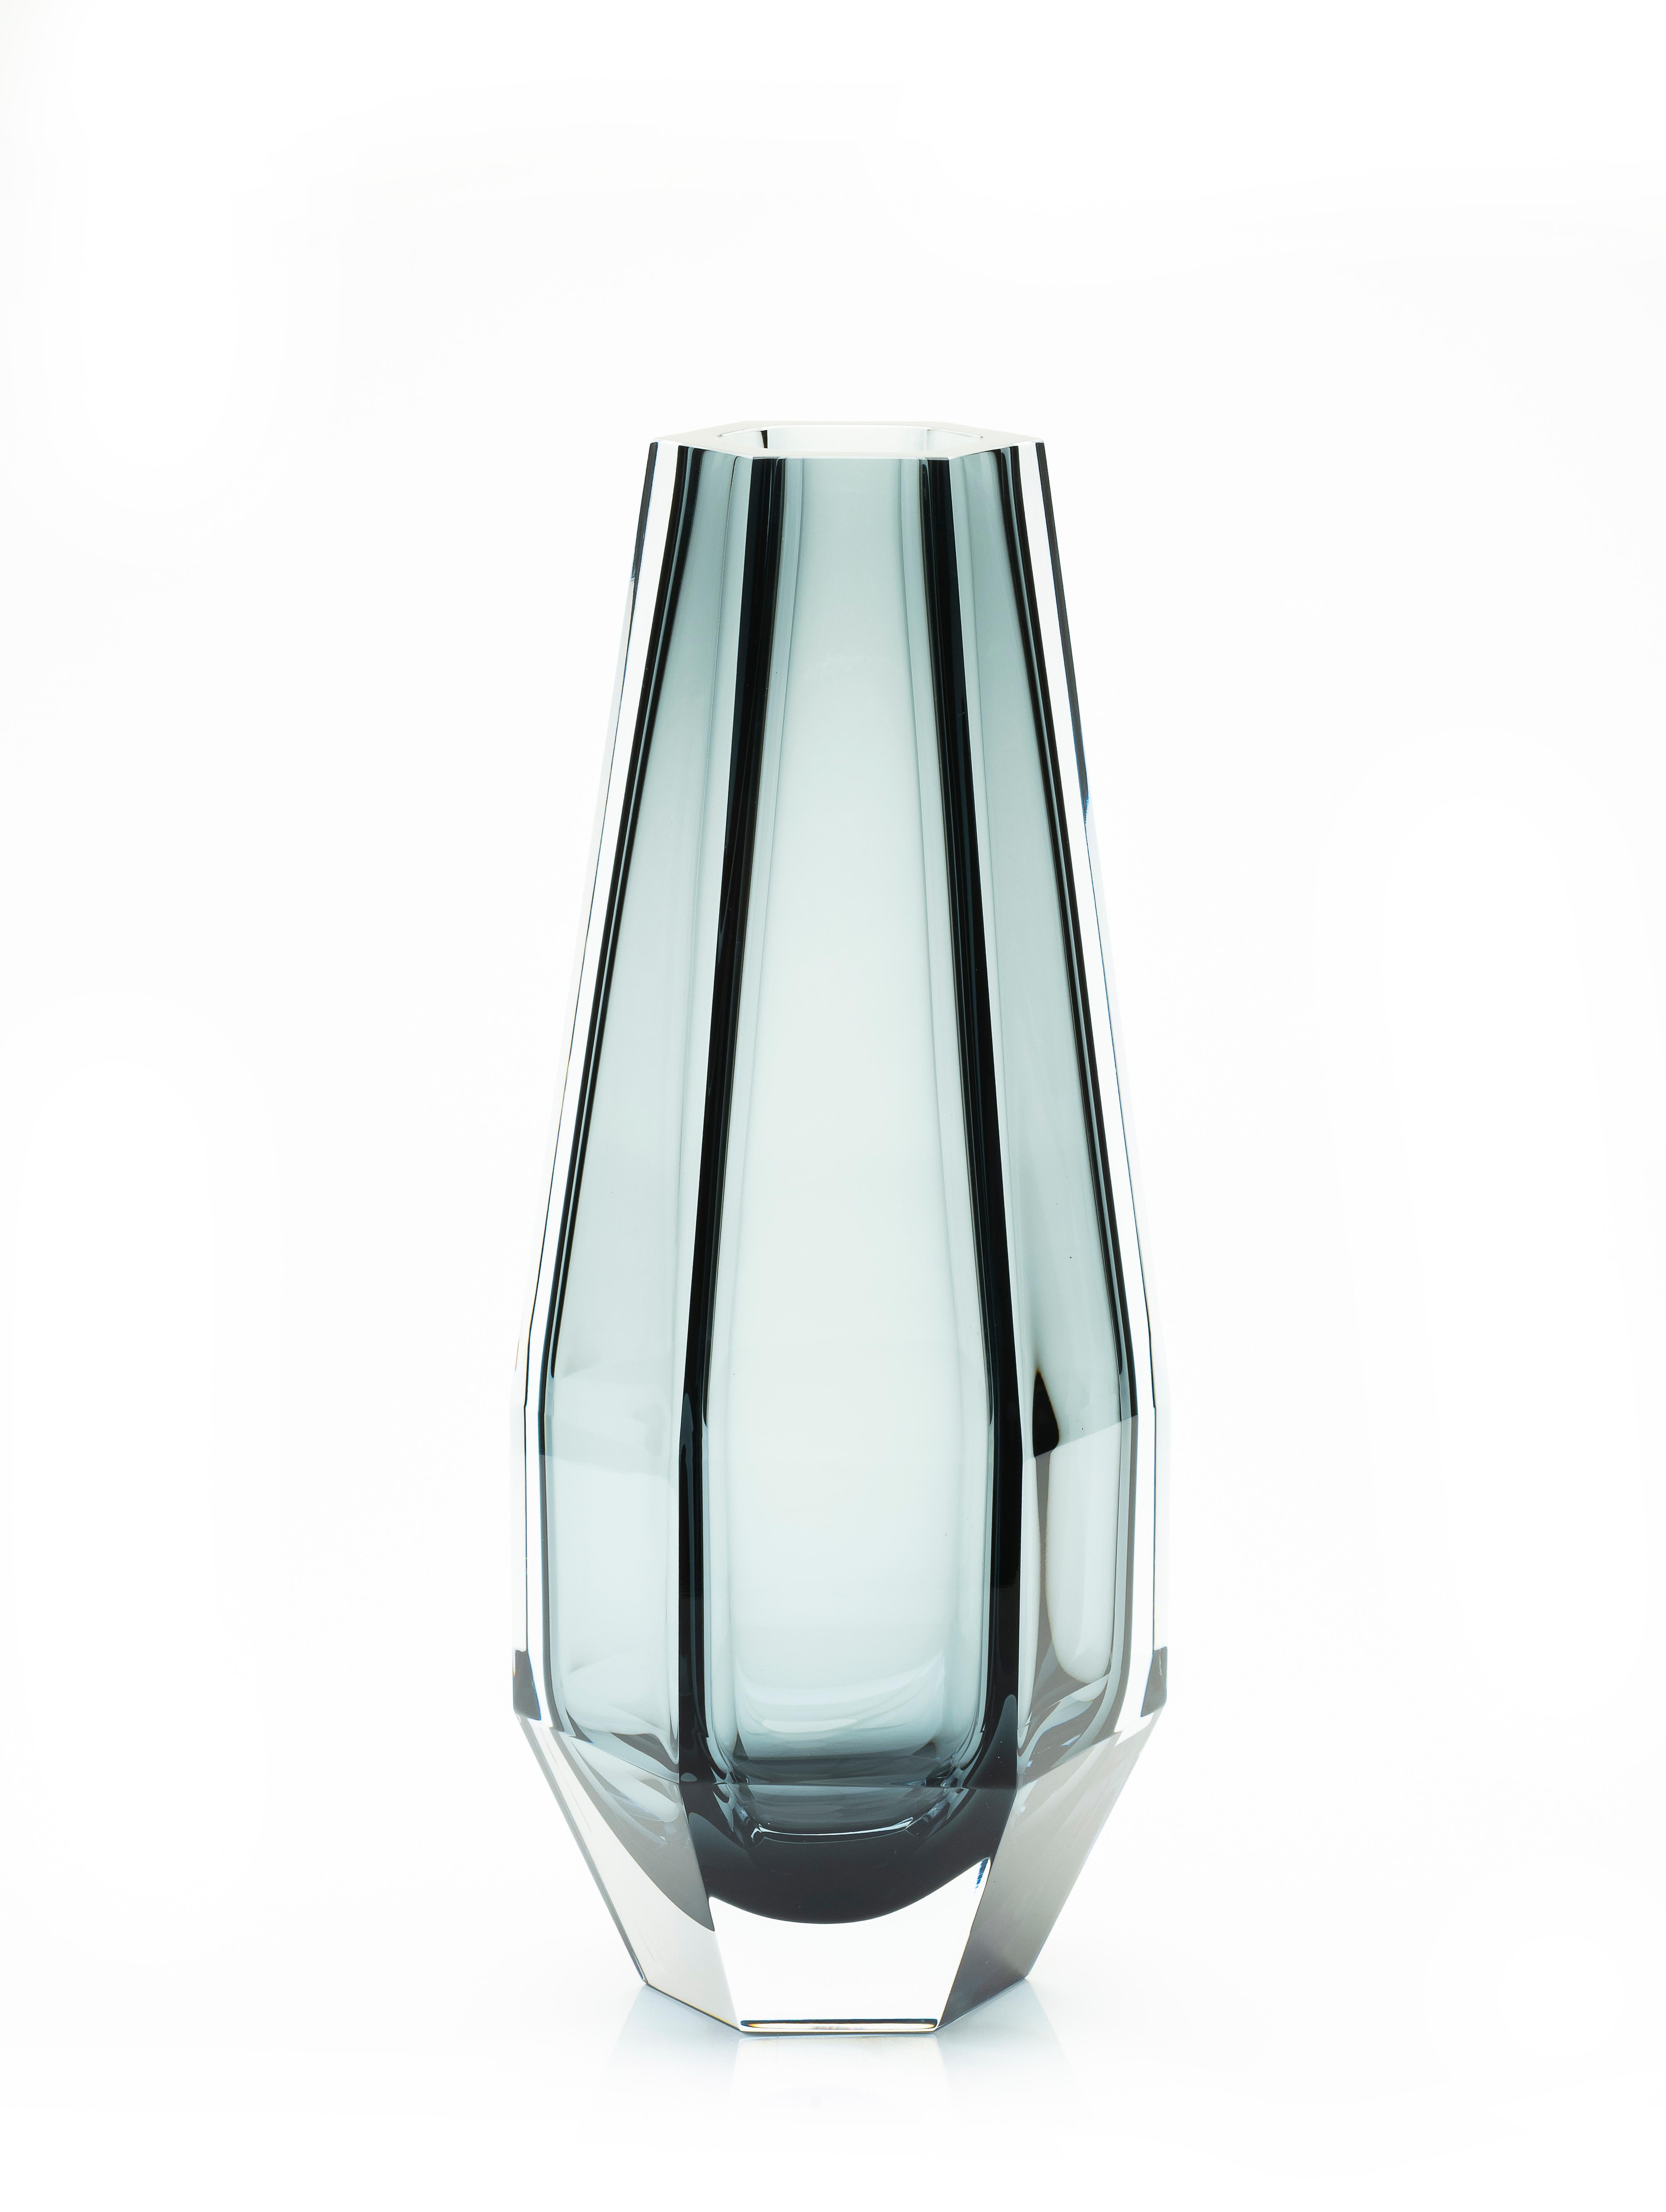 21st century Alessandro Mendini, GEMELLA transparent vase, Murano glass.
Purho continues to search for products with complementary shapes with the pair of Gemello and Gemella vases designed by Alessandro Mendini. Sharing the same design concept, the